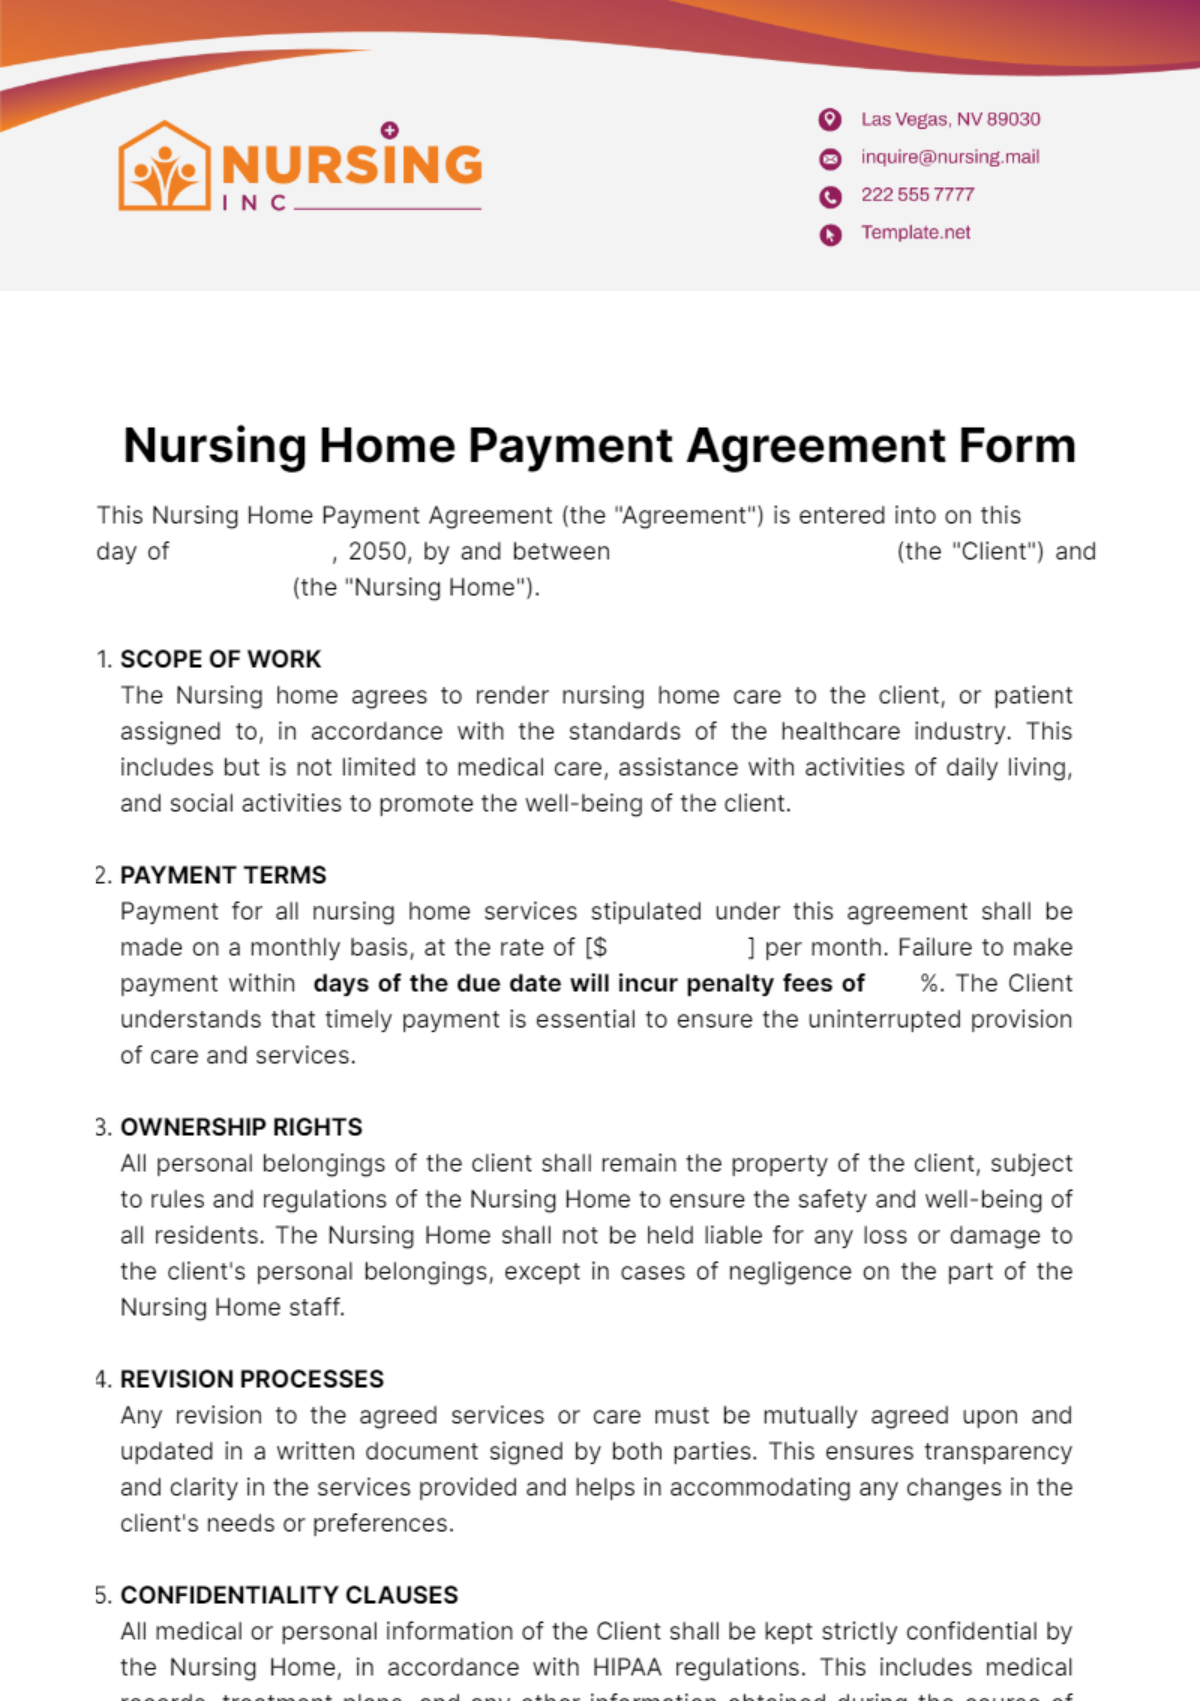 Nursing Home Payment Agreement Form Template